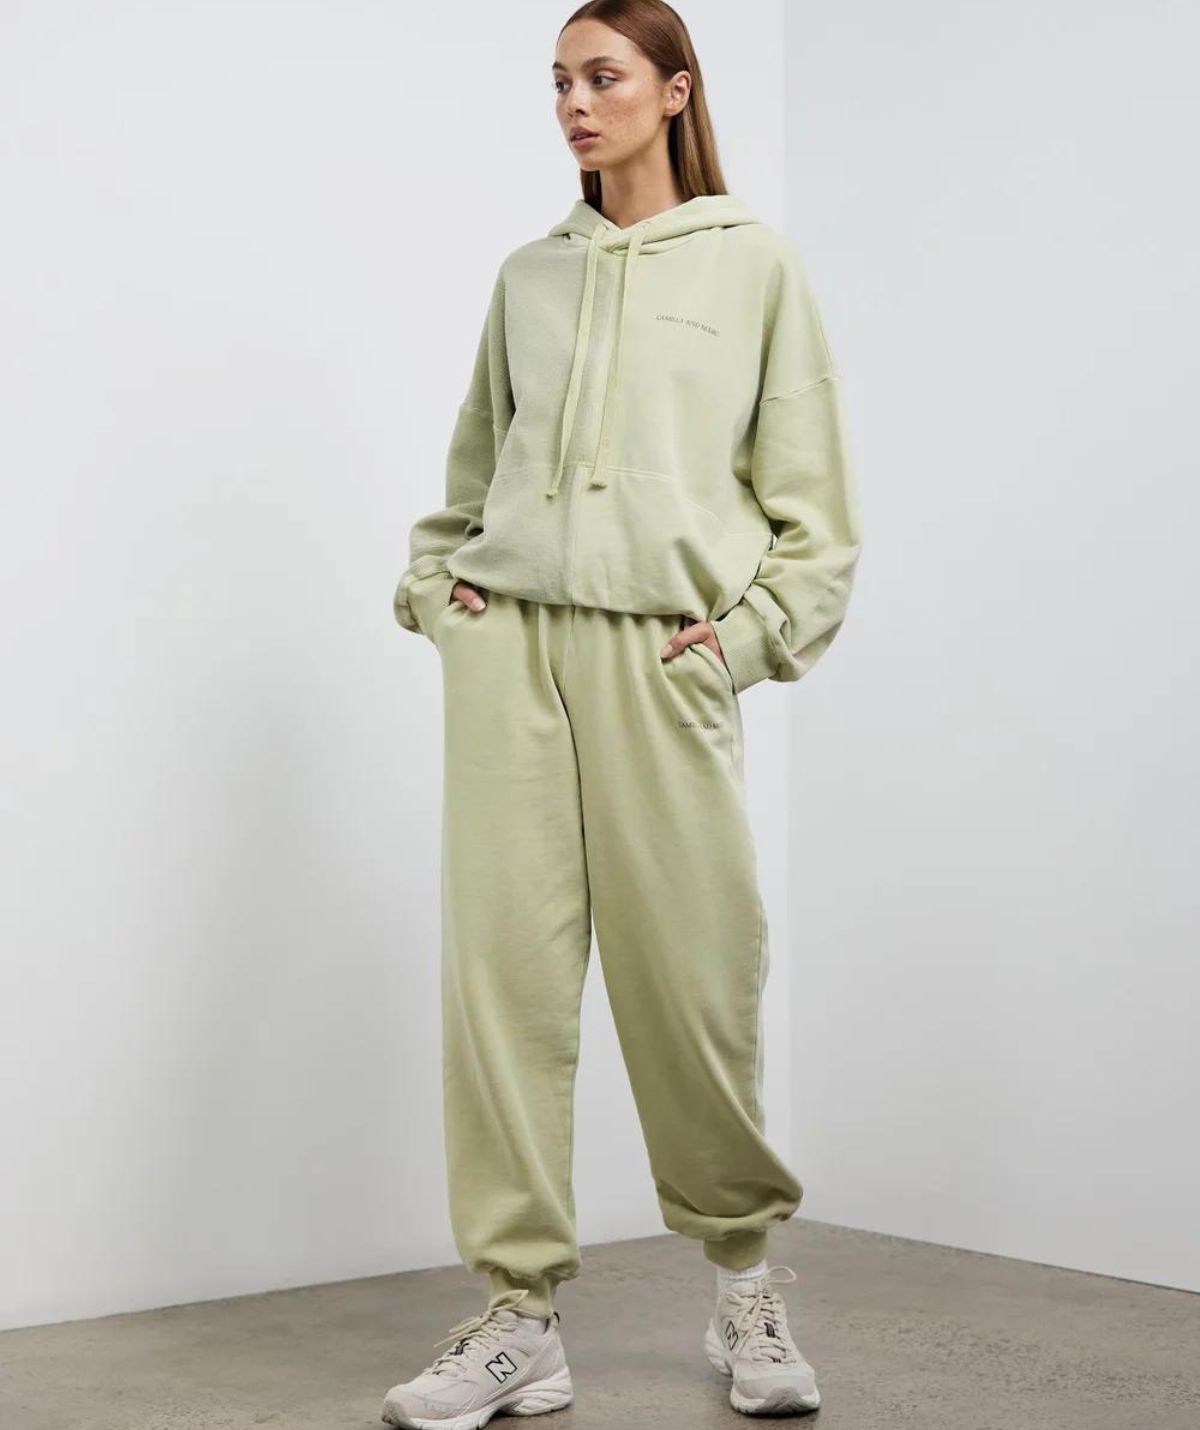 The Best Tracksuits to Shop in Australia 2023